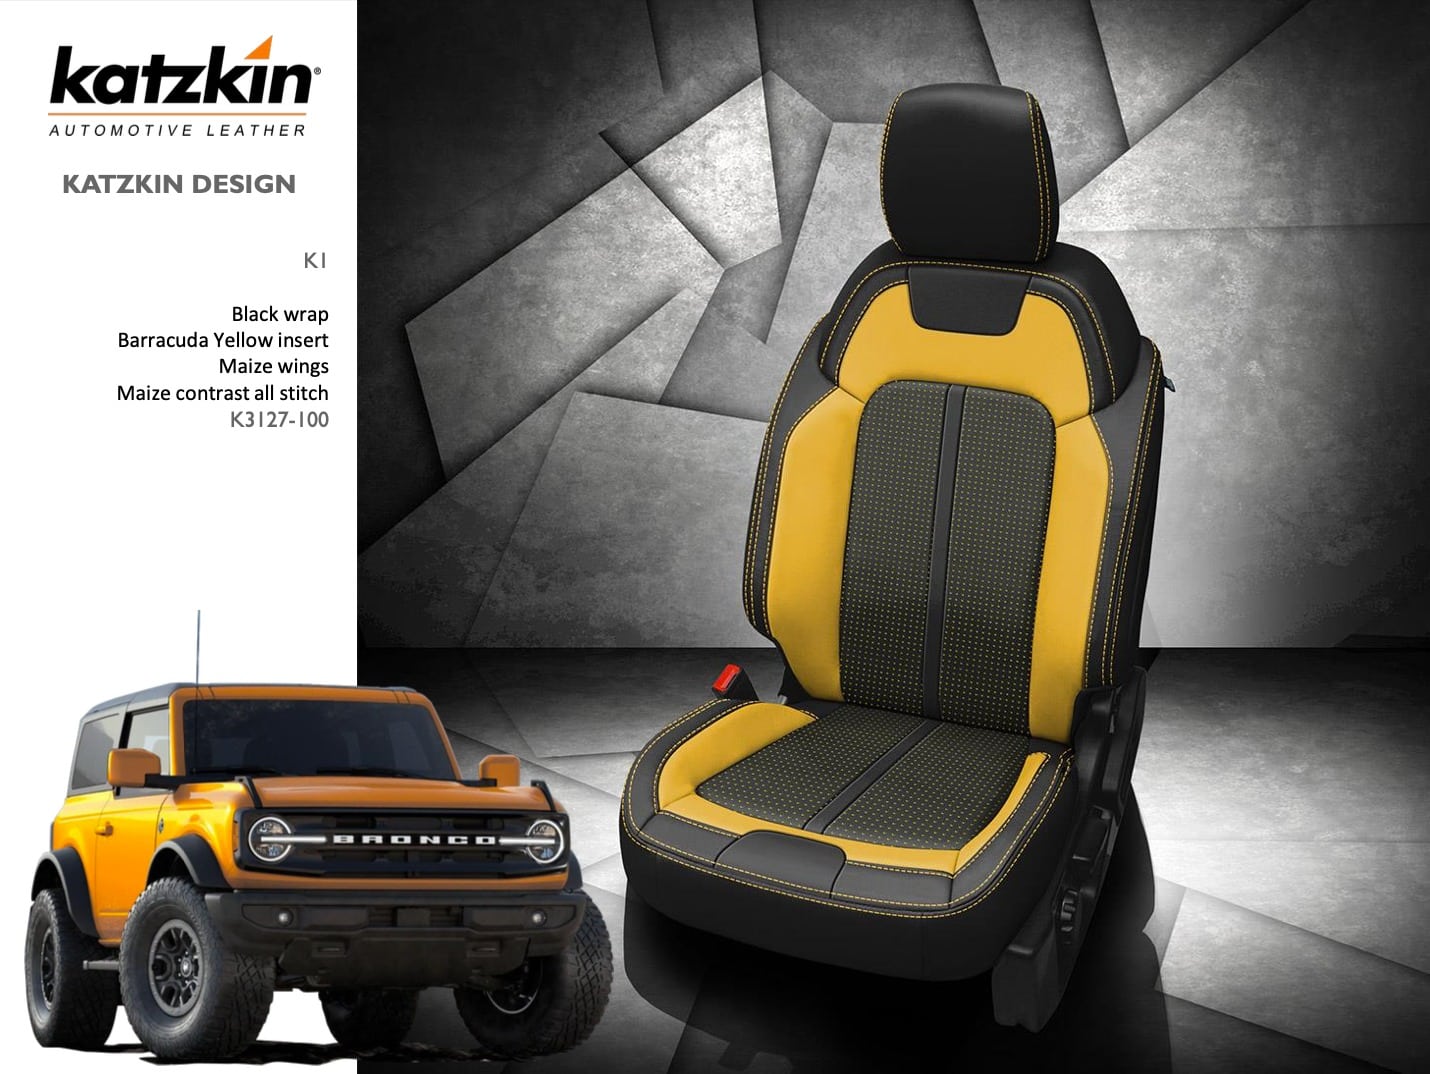 Katzkin Leather interiors 2 tone color Black wrap with Barracuda yellow insert, maize wings.